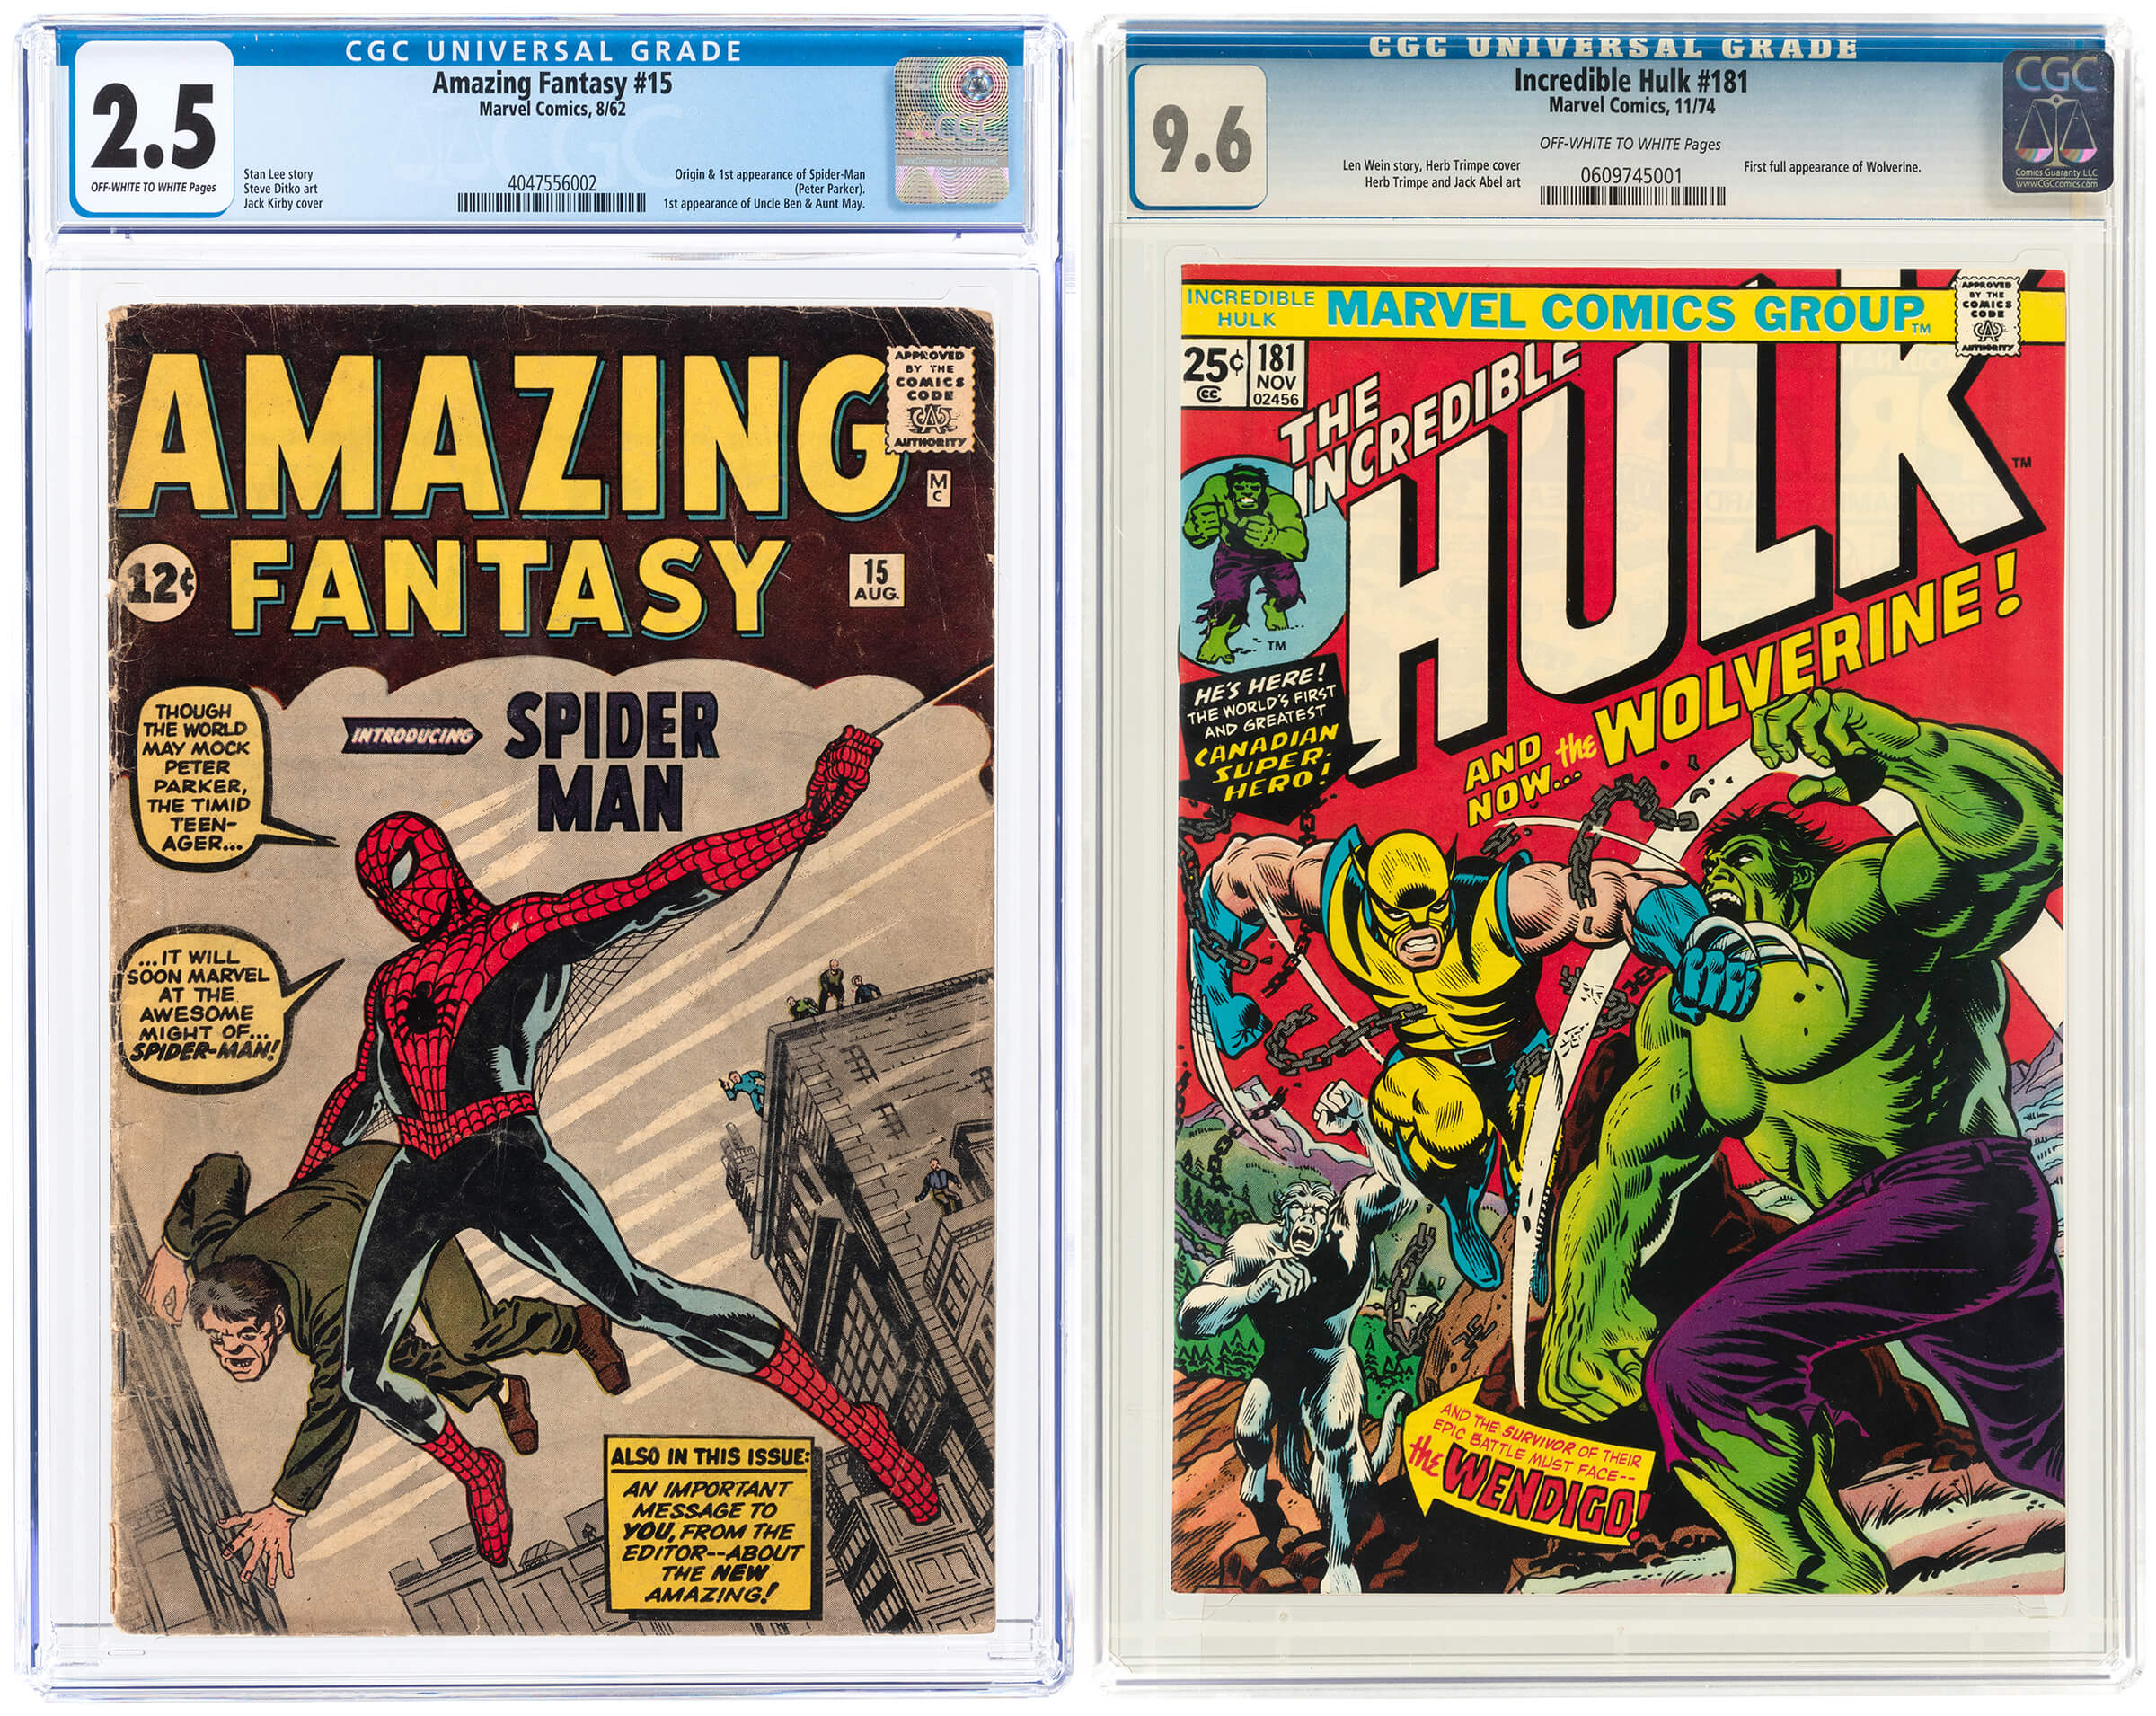 L to R: Marvel ‘Amazing Fantasy’ #15 Silver Age comic book, August 1962, CGC 2.5 Good+, introduces The Amazing Spider-Man (Peter Parker), est. $35,000-$50,000; and Marvel ‘Incredible Hulk’ #181 Bronze Age comic book, November 1974, CGC 9.6 NM+ with first full appearance of Wolverine, est. $20,000-$35,000. Images courtesy of Hake’s Auctions